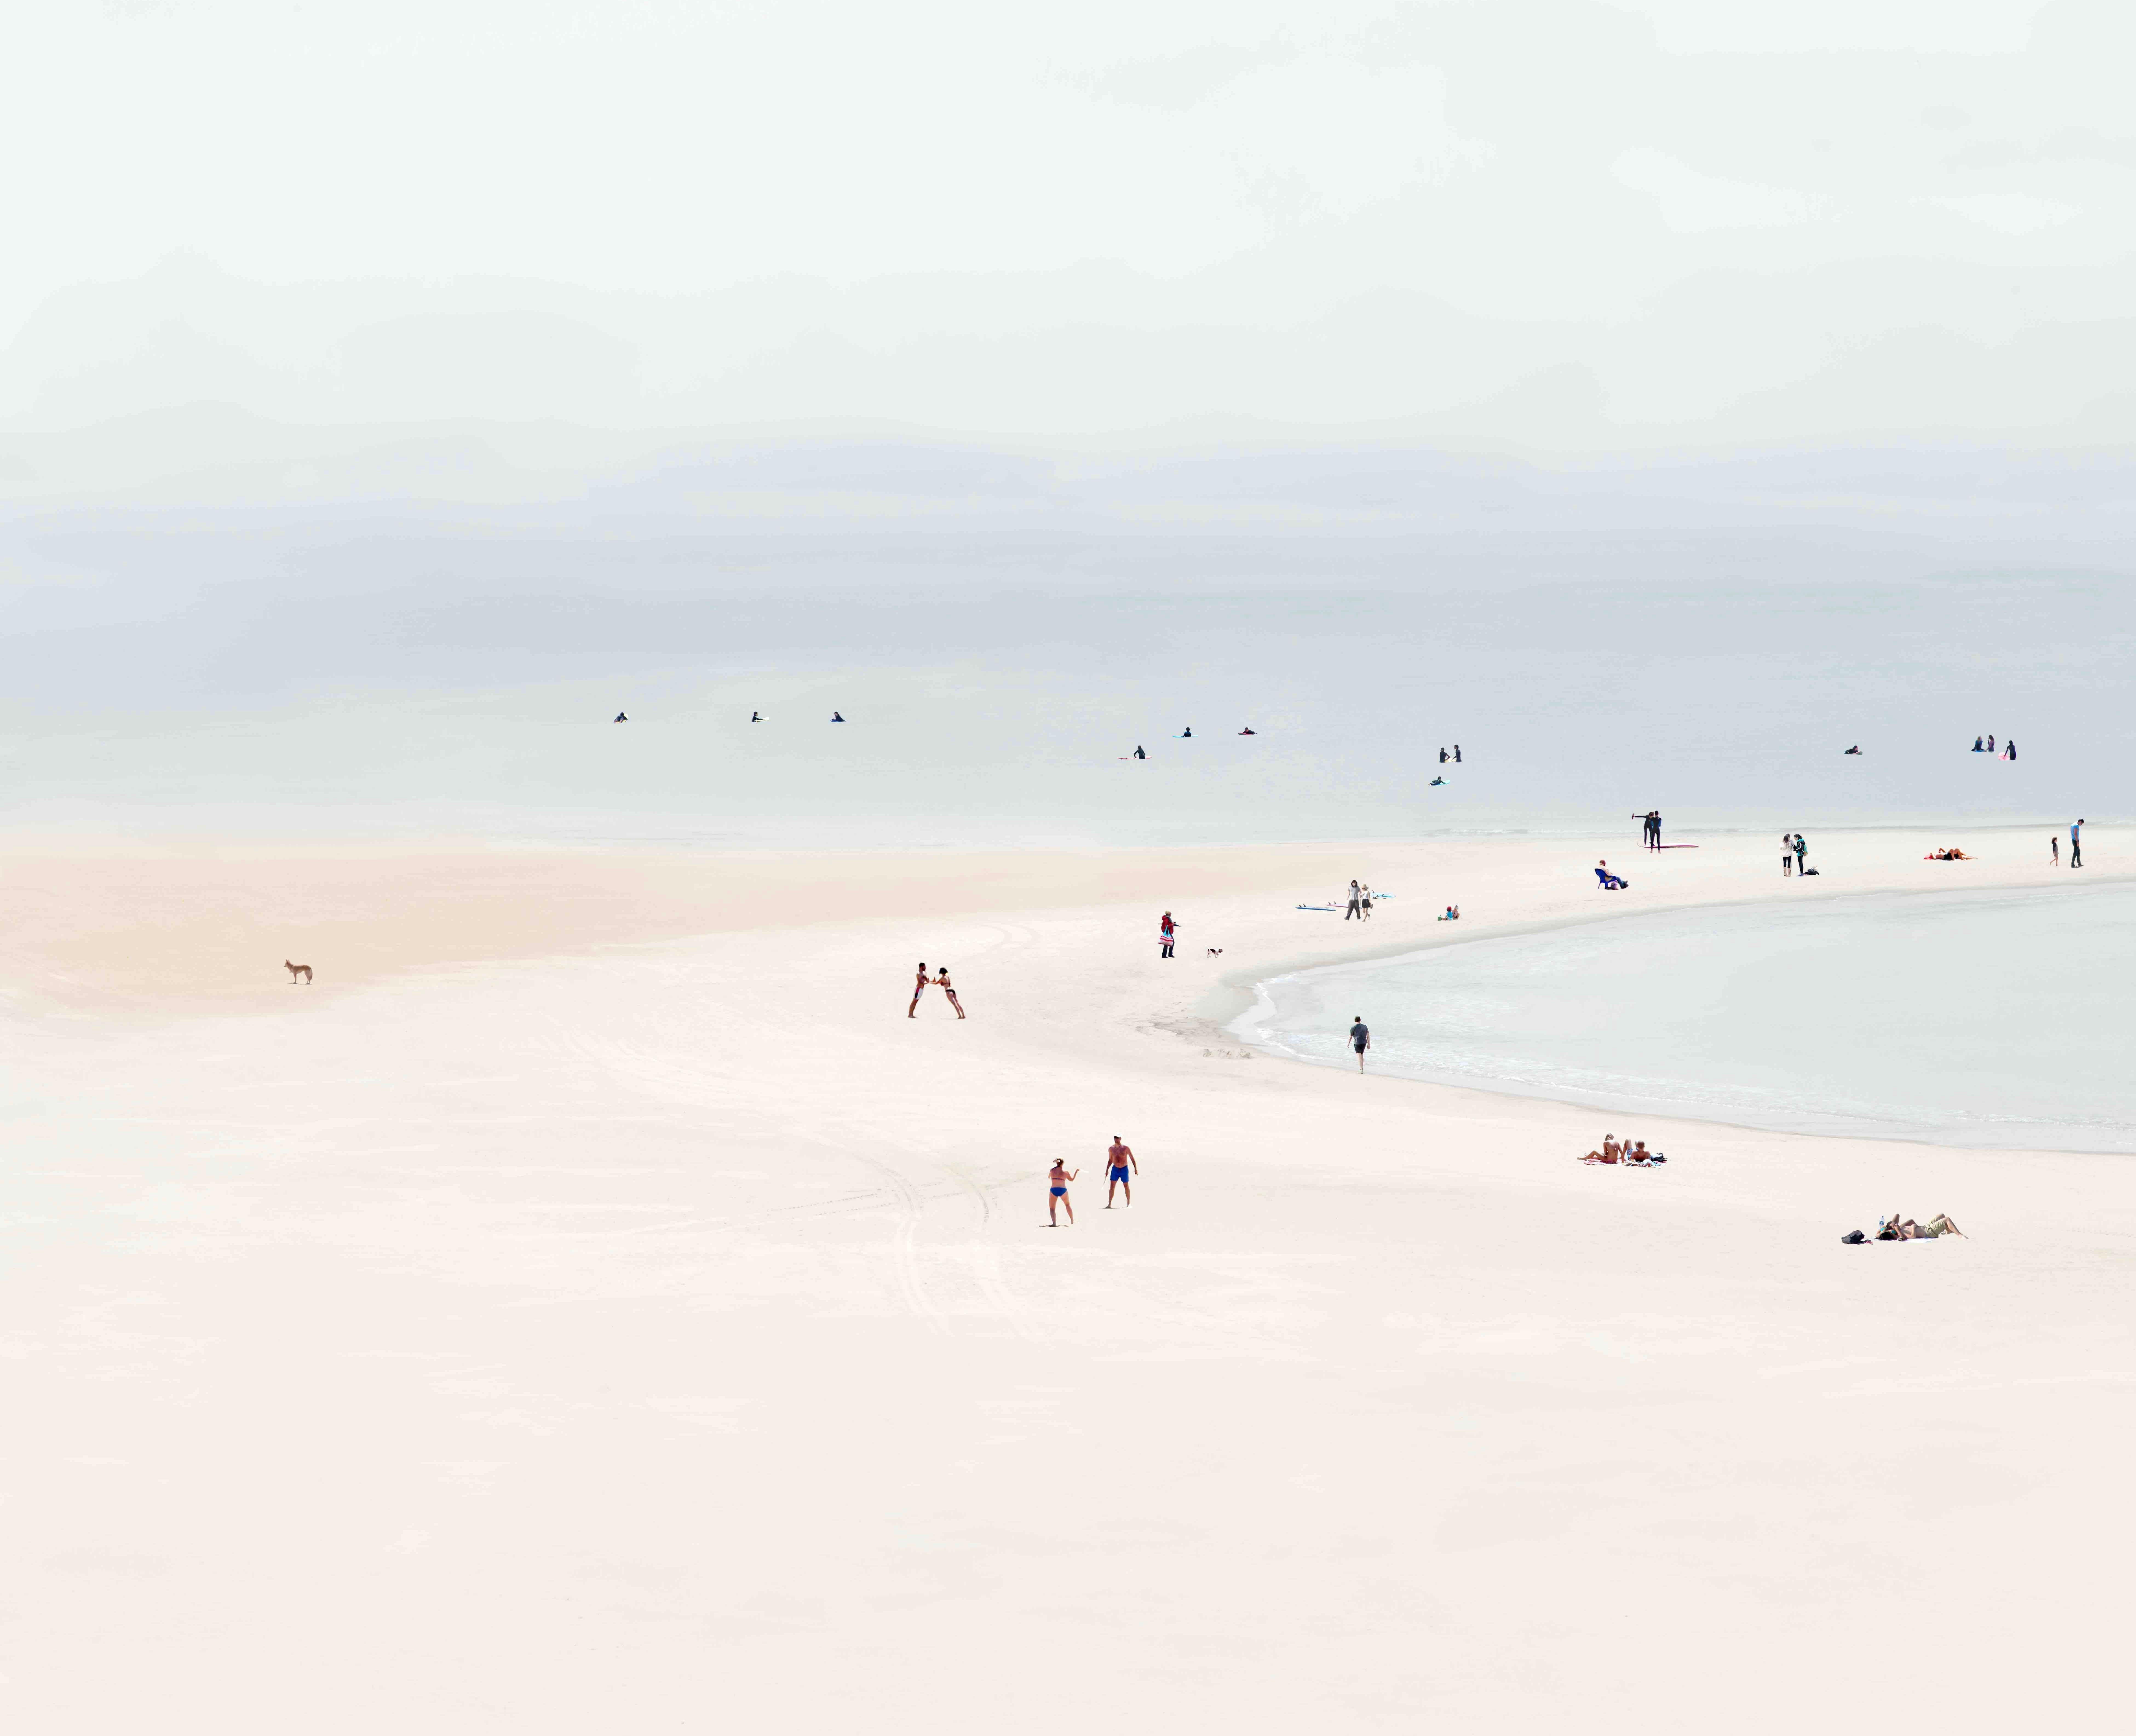 This art work is part of Igal`s beach series.
In this series, Igal takes photos of different scenes on the Tel Aviv beaches of Israel (where he lives) and manipulates the images to make it look as if they were surreal.
The all image has a whitish